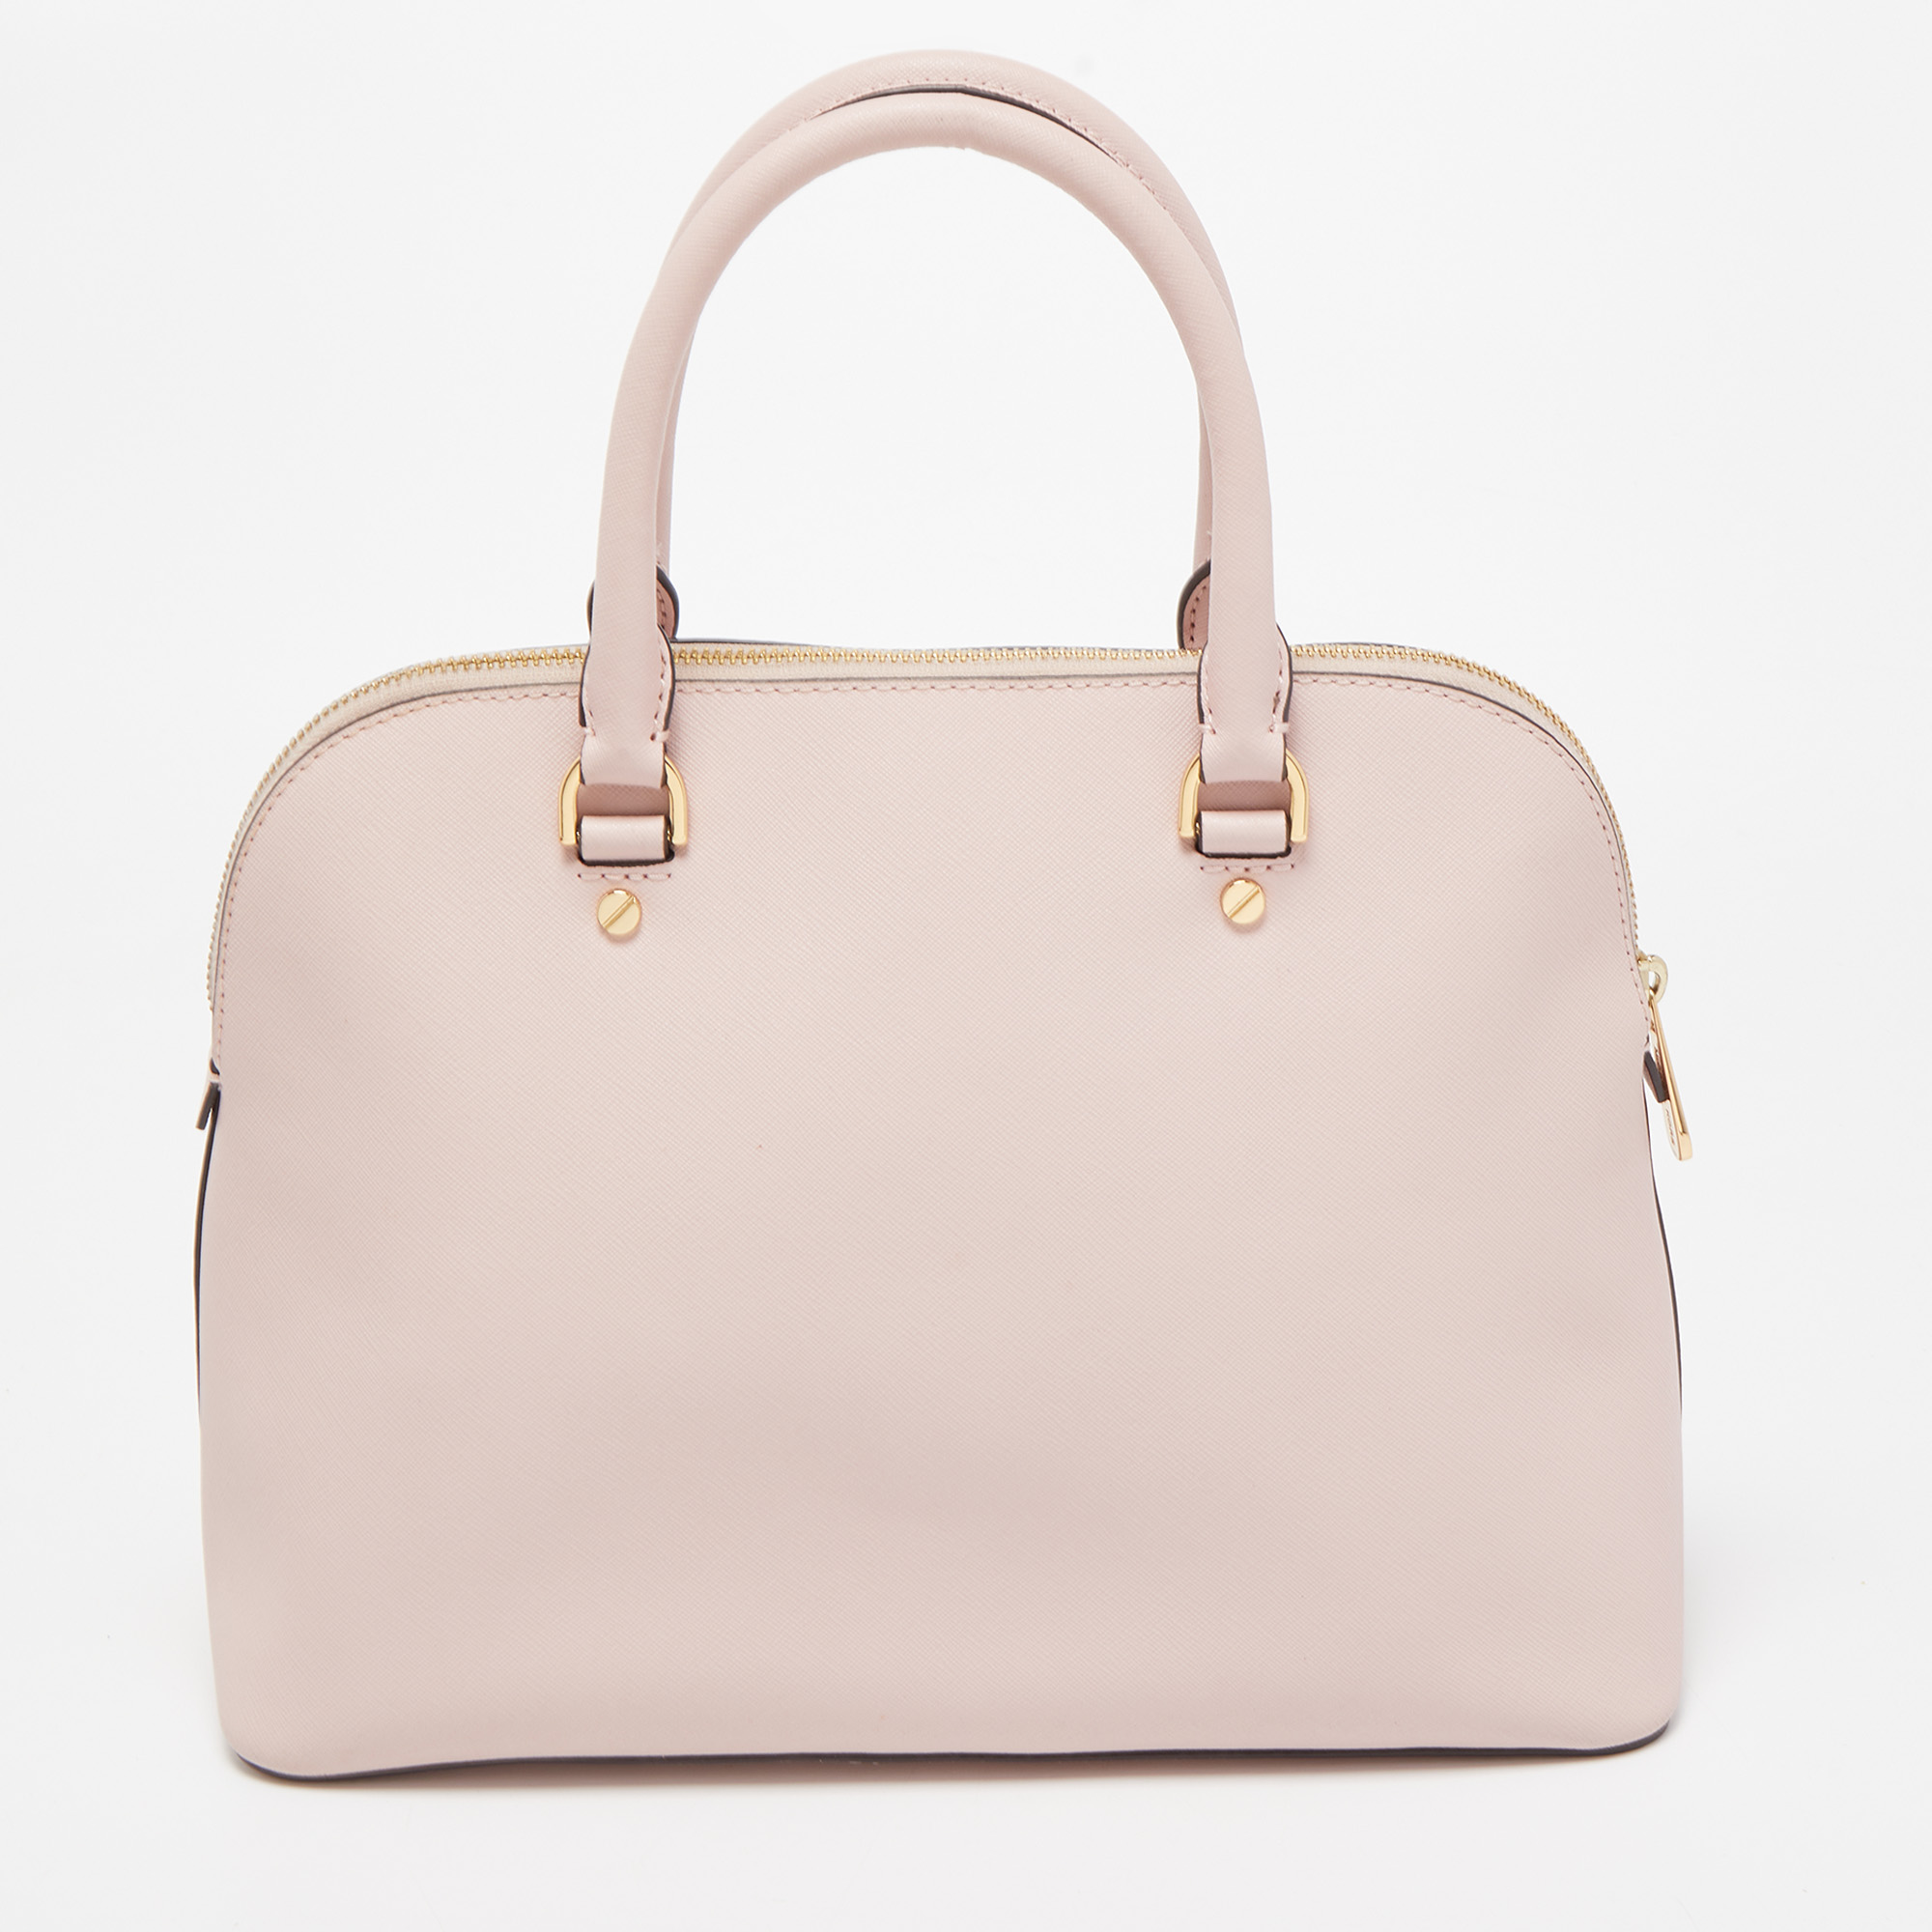 MICHAEL Micheal Kors Slight Pink Saffiano Leather Cindy Dome Satchel